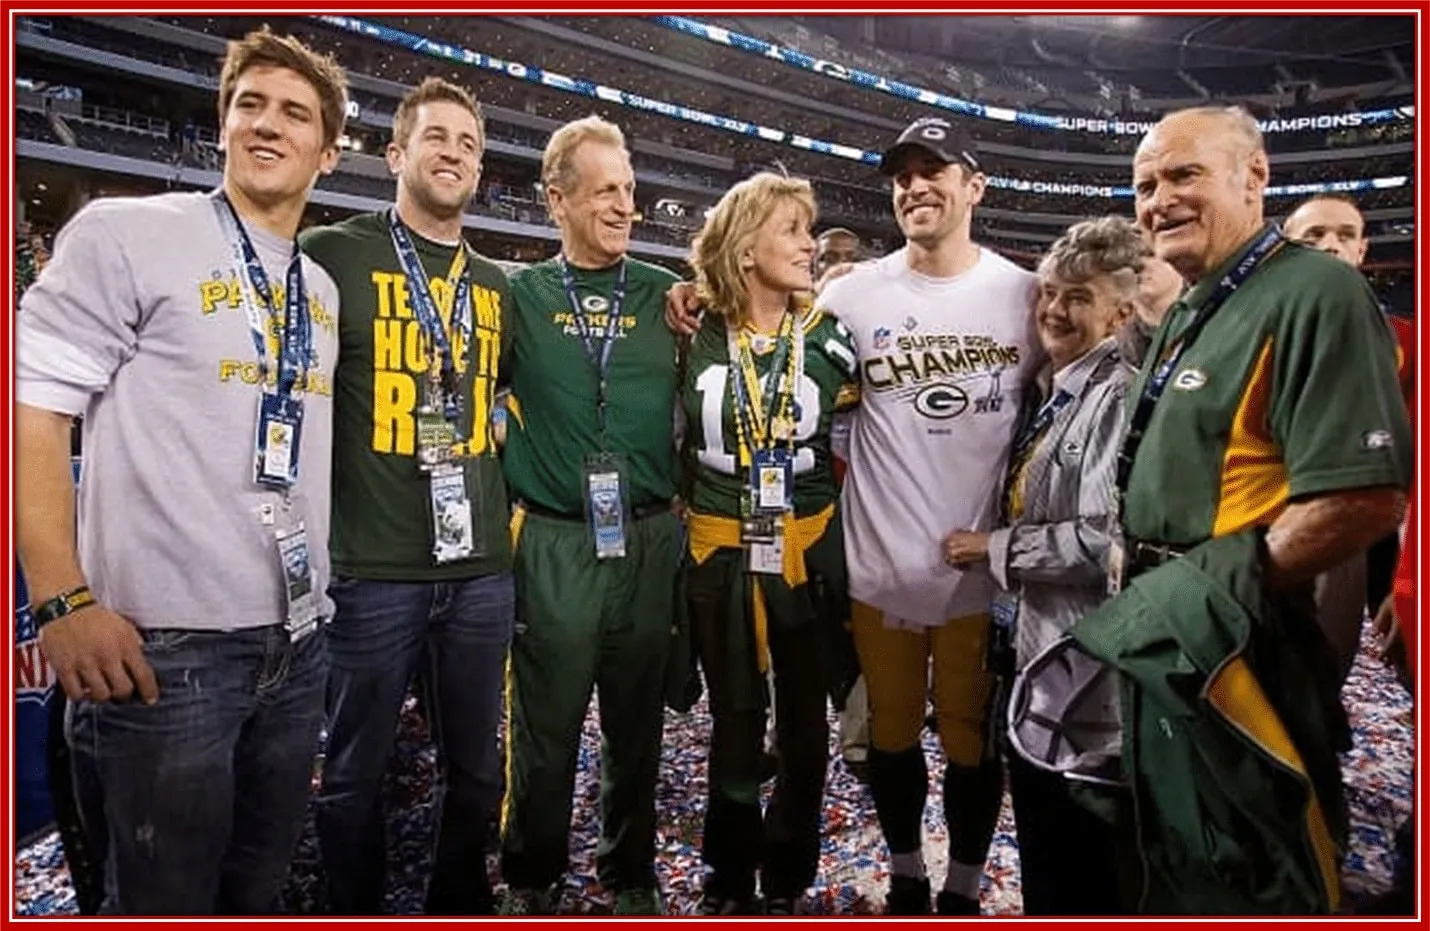 The Rodgers' household after a game - parents, grandparents and children.